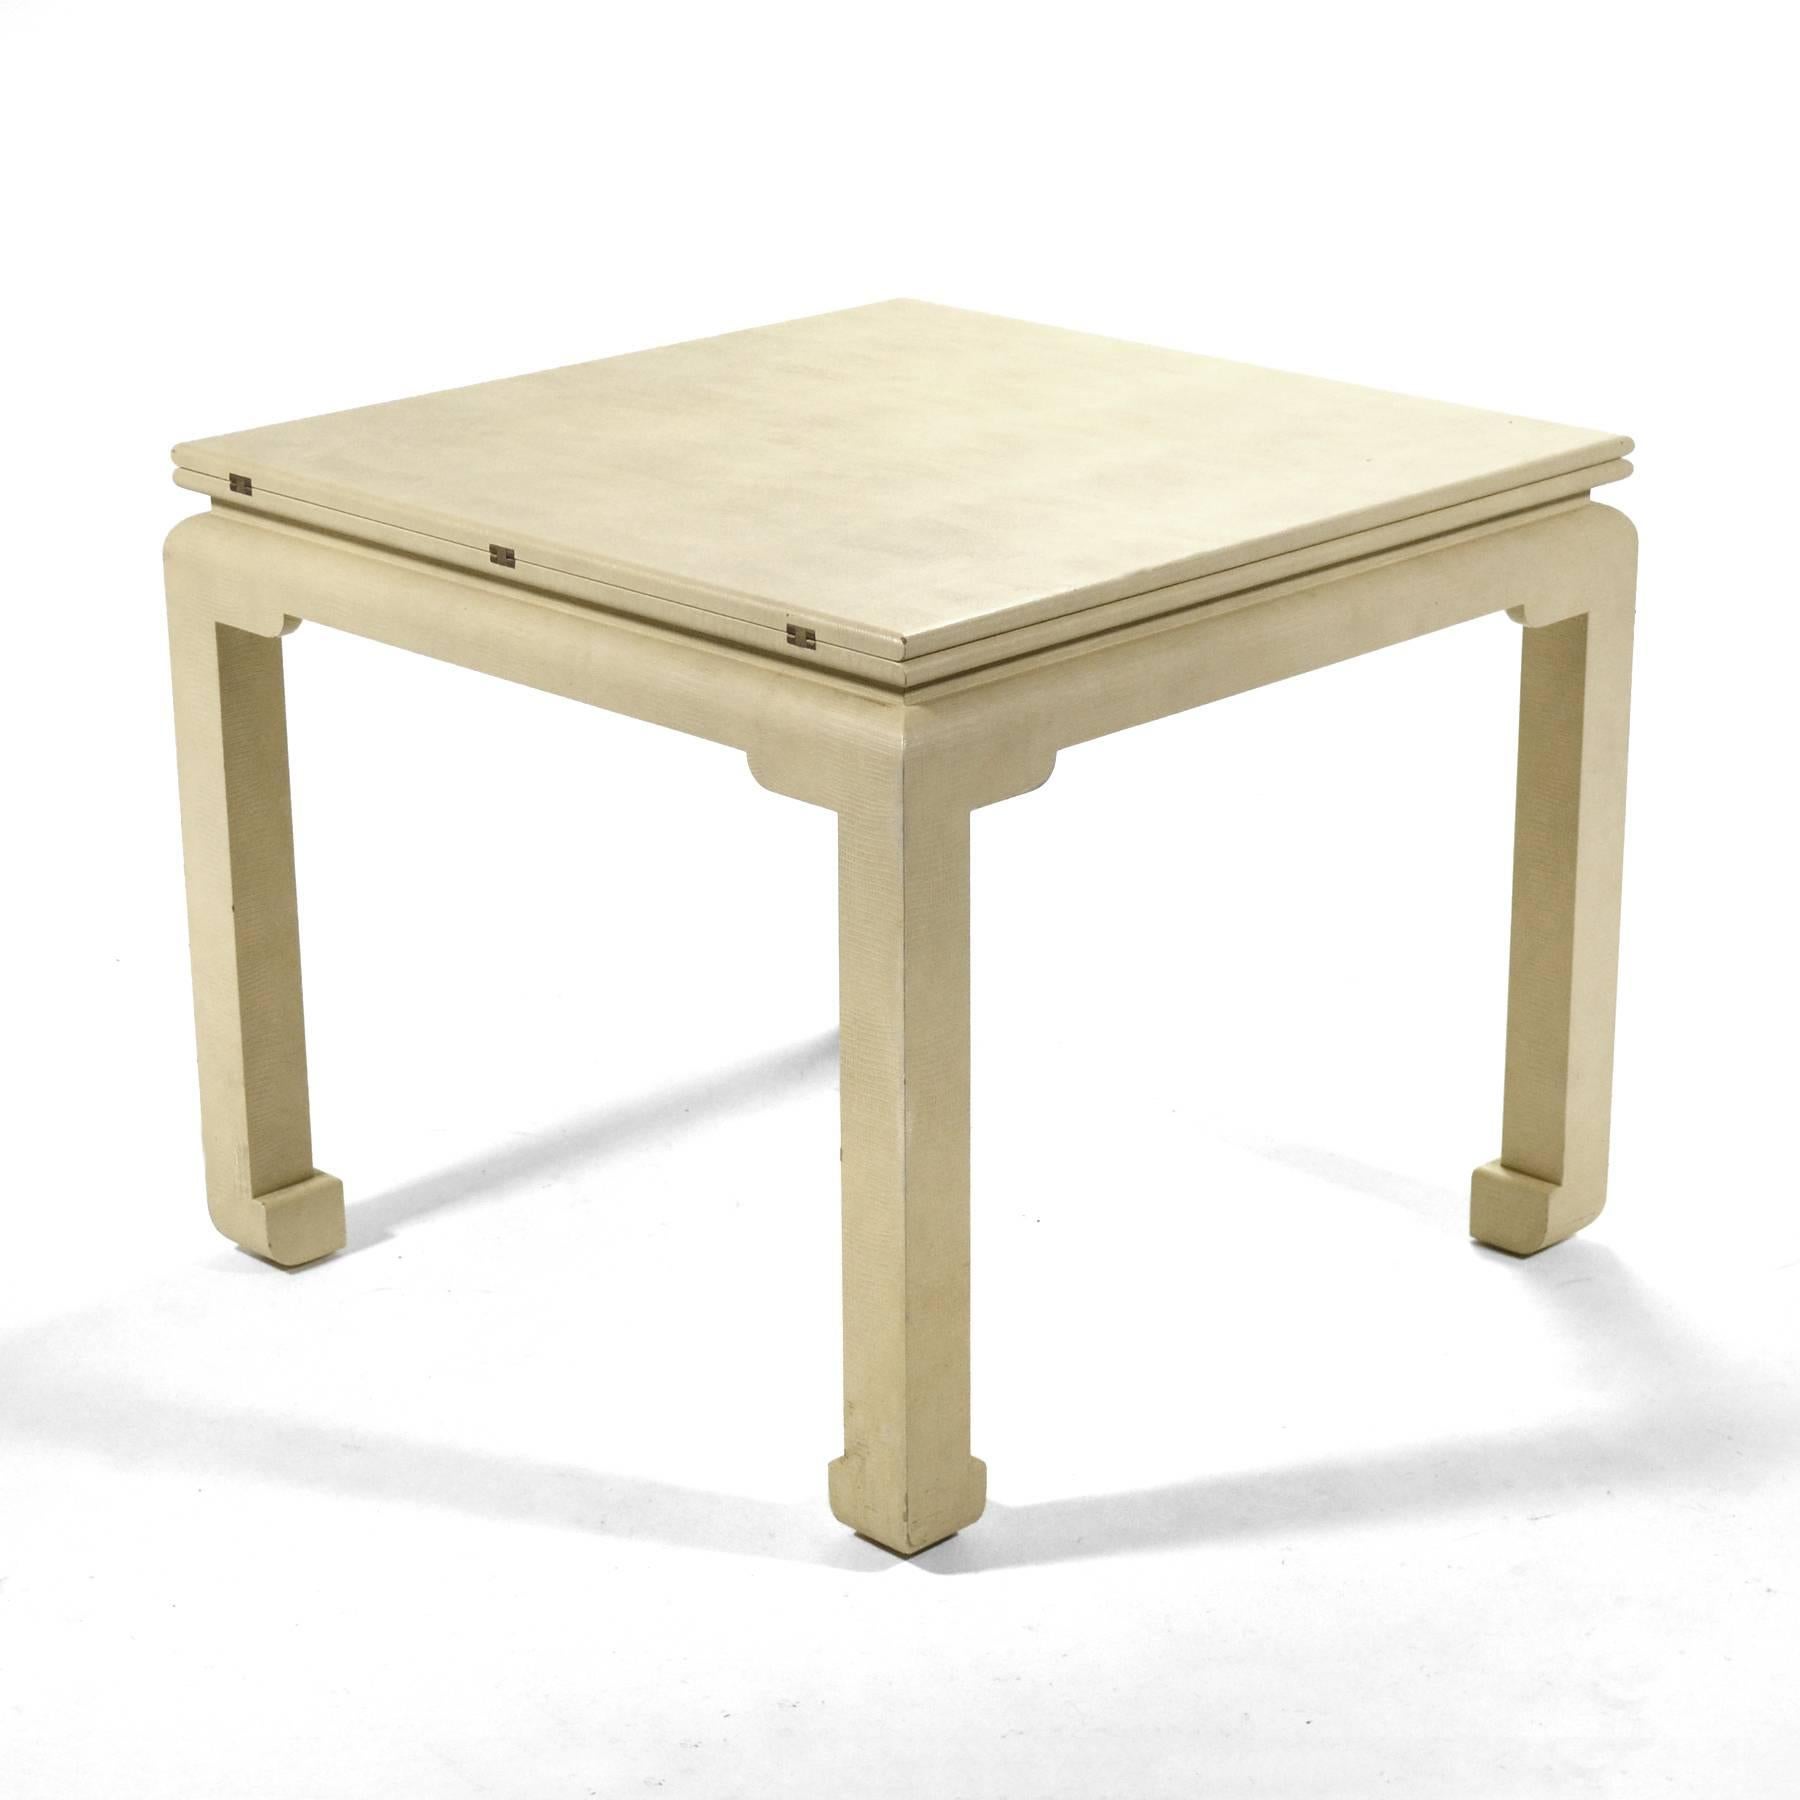 This striking game table by Karl Springer is clad in ivory snake-embossed leather and has a top that flips open to double in size allowing it to serve as a dining table.